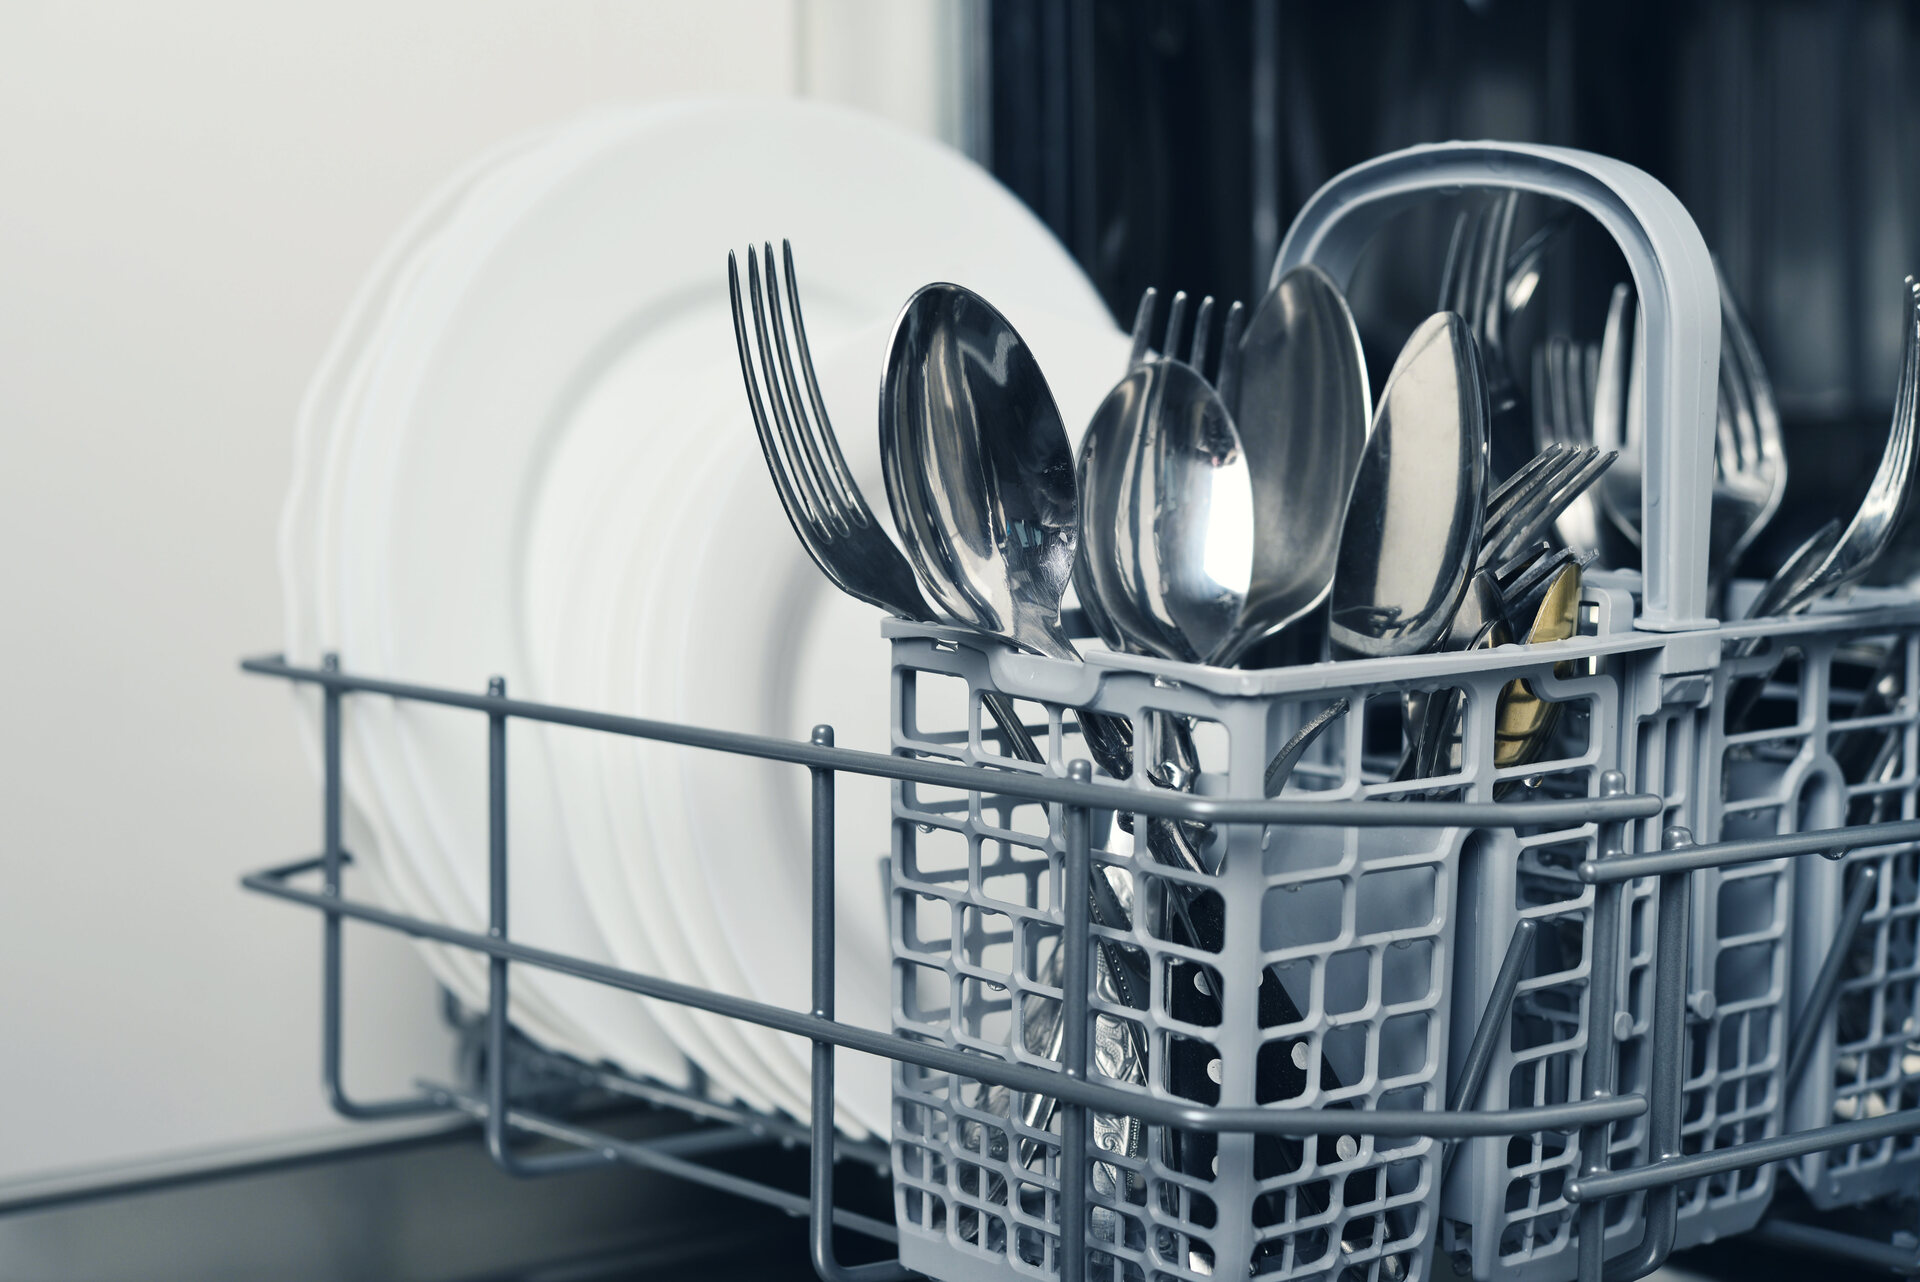 Which Way To Place Cutlery In Dishwasher